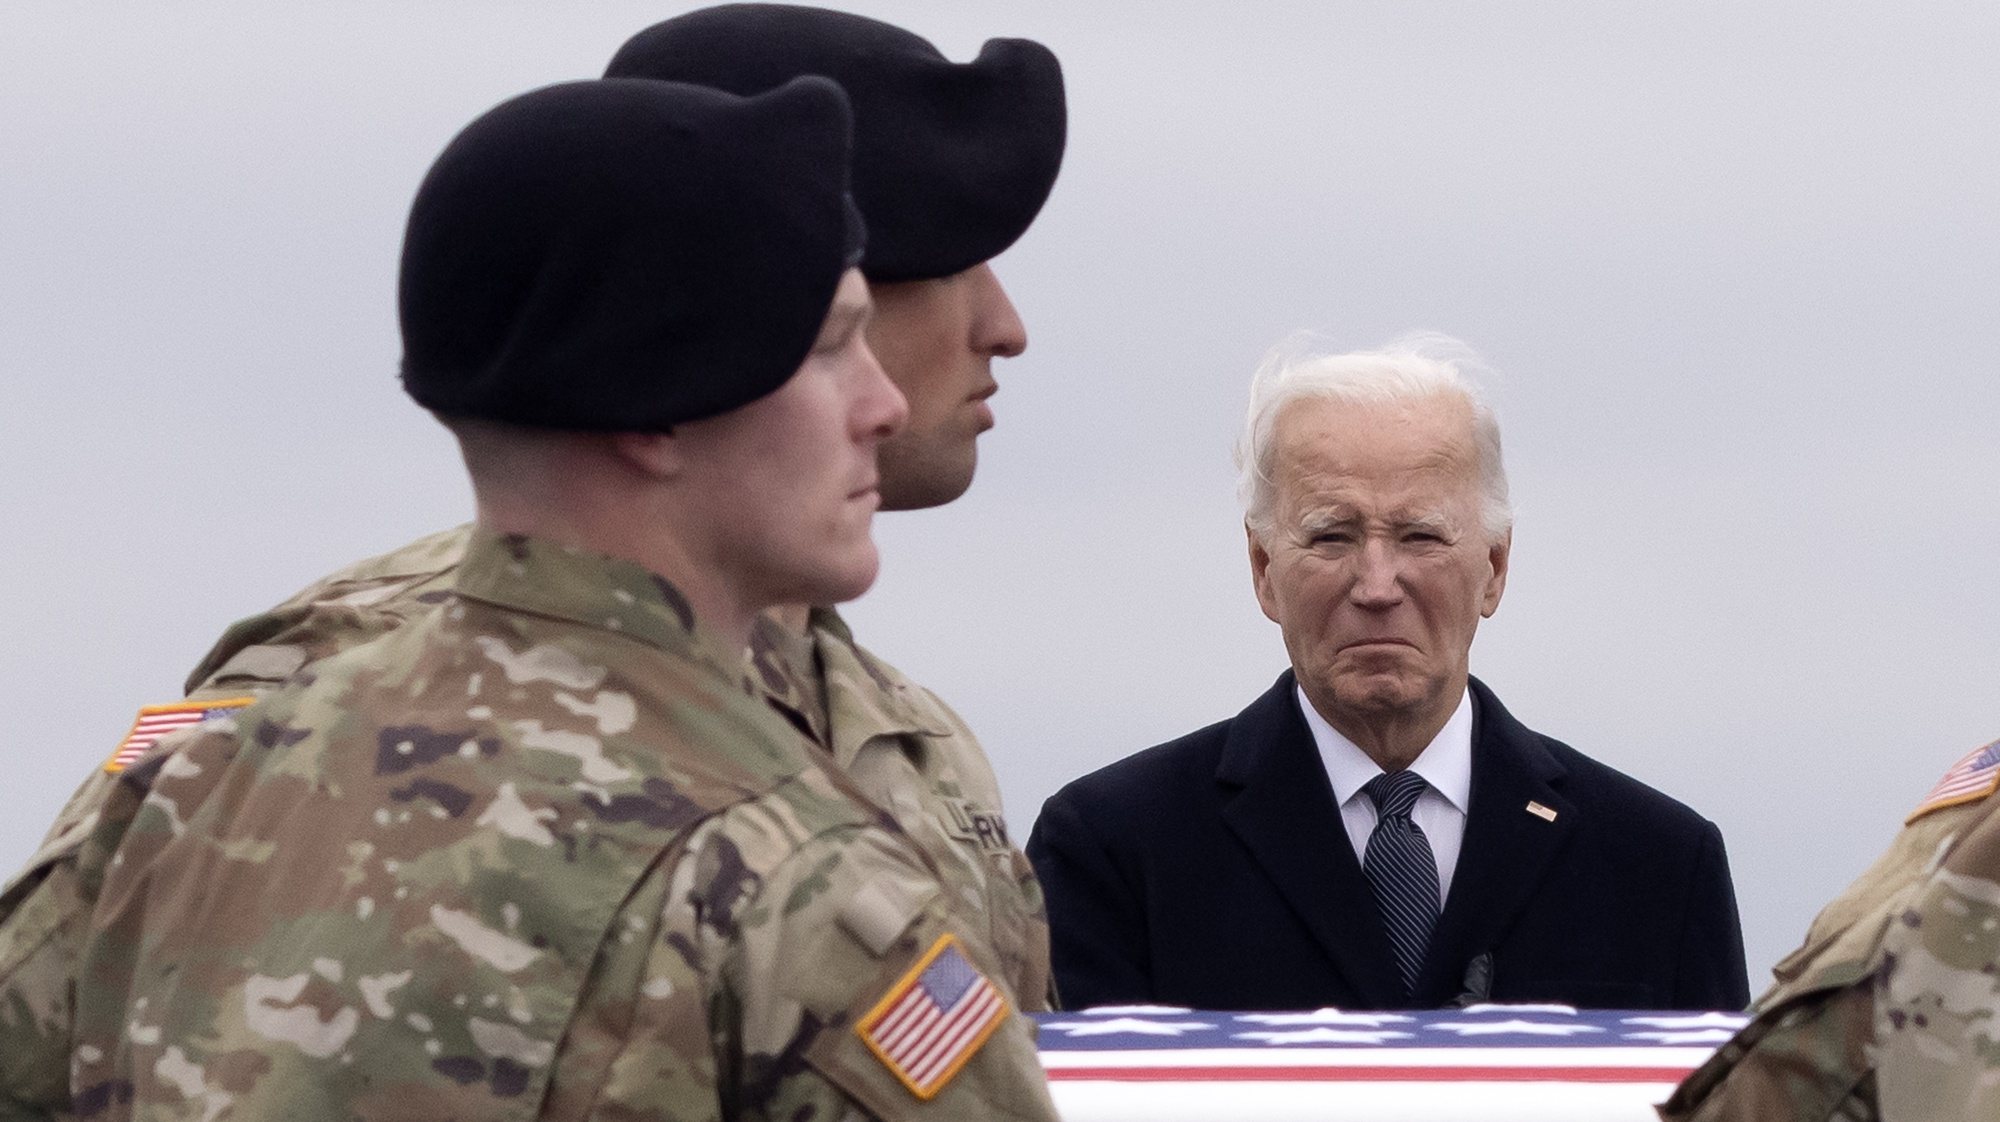 epa11121741 US President Joe Biden (R) watches as a US Army carry team moves a flag-draped transfer case containing the remains of US Army Sergeant Jerome Rivers, during a dignified transfer of fallen US service members, at Dover Air Force Base in Dover, Delaware, USA, 02 February 2024. US Army Sergeant Jerome Rivers. US Army Sergeant Breonna Moffett, and US Army Sergeant Kennedy Sanders died in a drone strike on 28 January at a military base in Jordan; forty other US troops were also injured in the attack. The enemy drone, which the White House has blamed on an Iran-backed militia, may have been mistaken for a US drone and left unimpeded, according to a preliminary report.  EPA/MICHAEL REYNOLDS